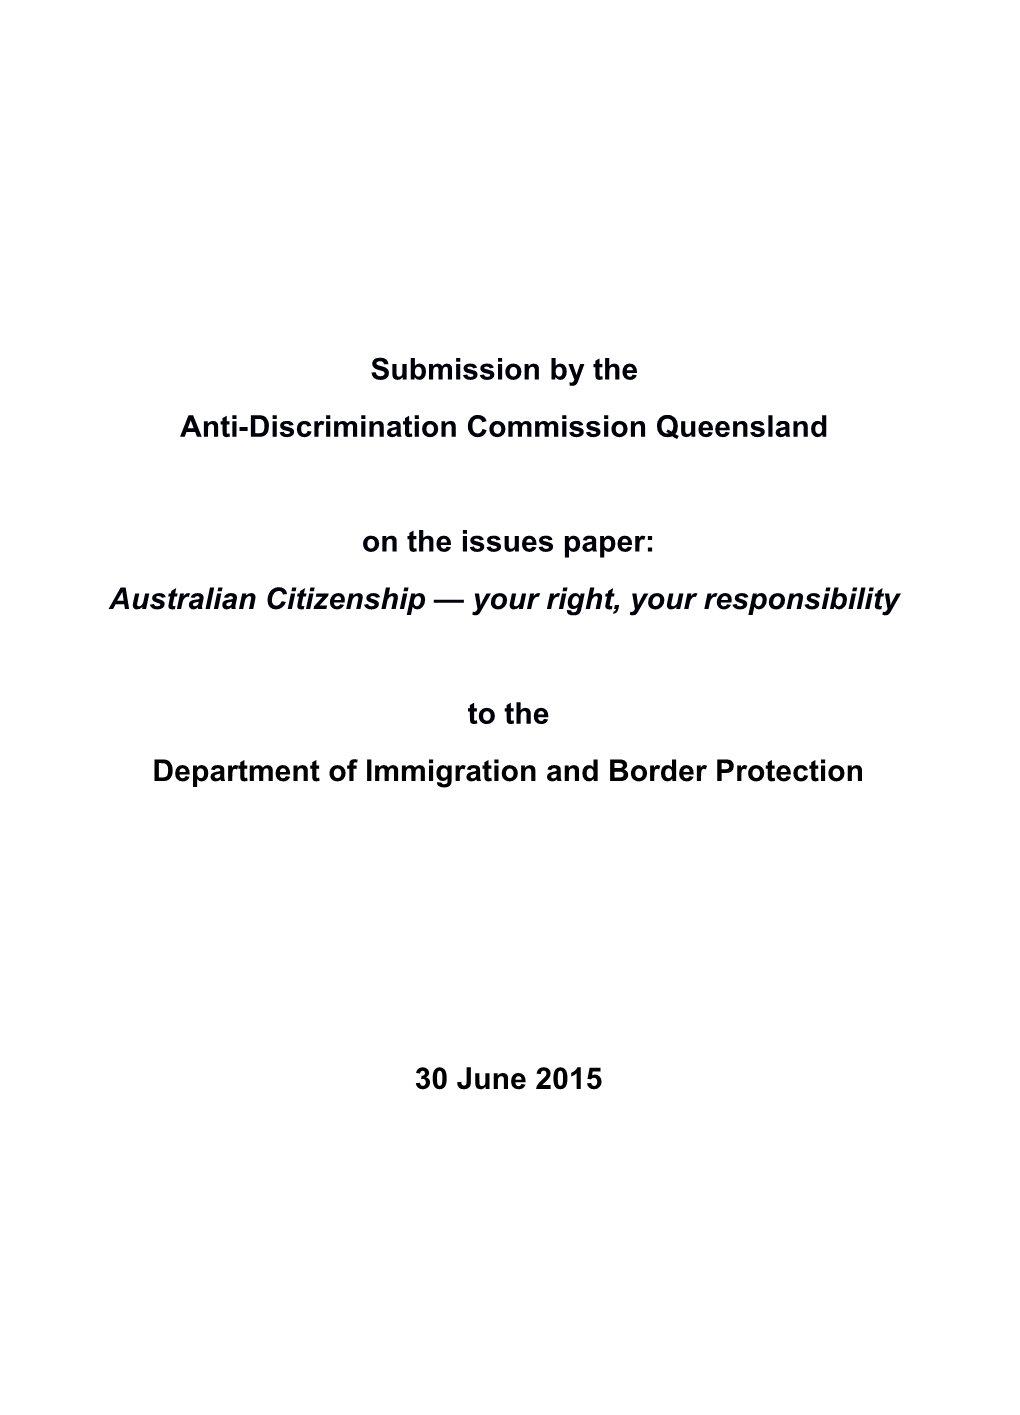 Submission to the Department of Immigration and Border Protection on the Issues Paper Australian